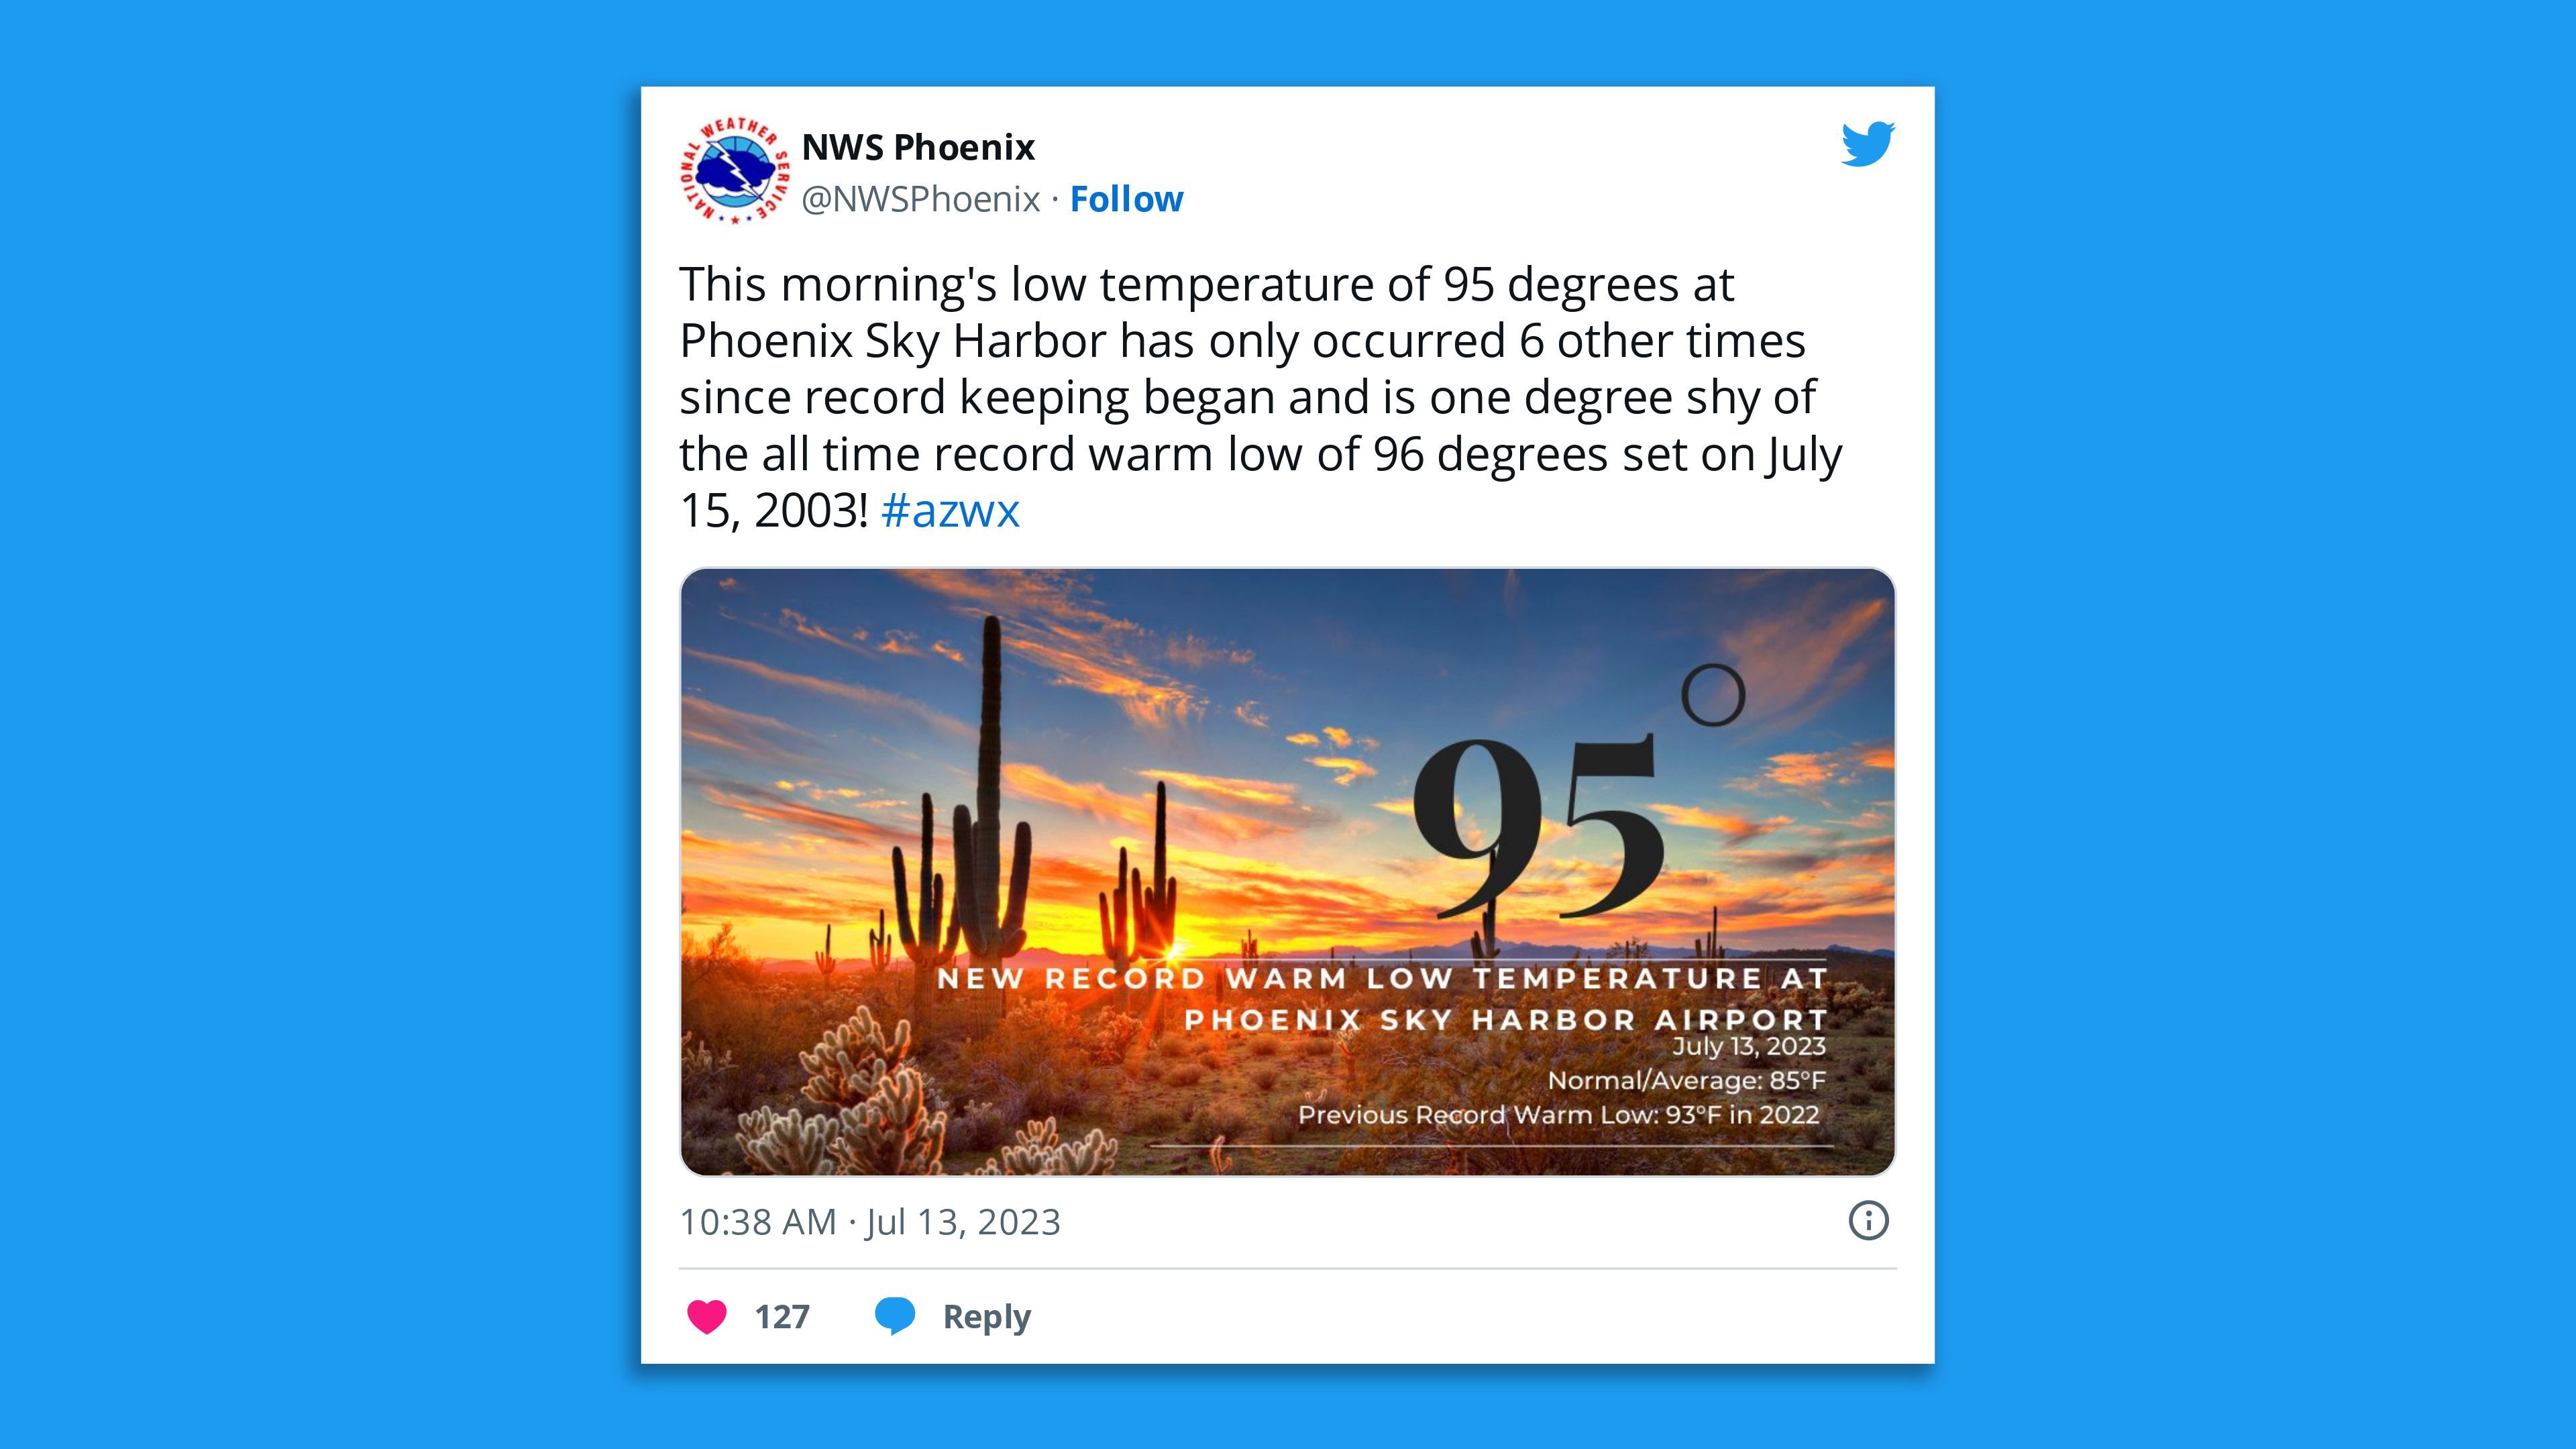 A screenshot of an NWS tweet saying: "This morning's low temperature of 95 degrees at Phoenix Sky Harbor has only occurred 6 other times since record keeping began and is one degree shy of the all time record warm low of 96 degrees set on July 15, 2003!"